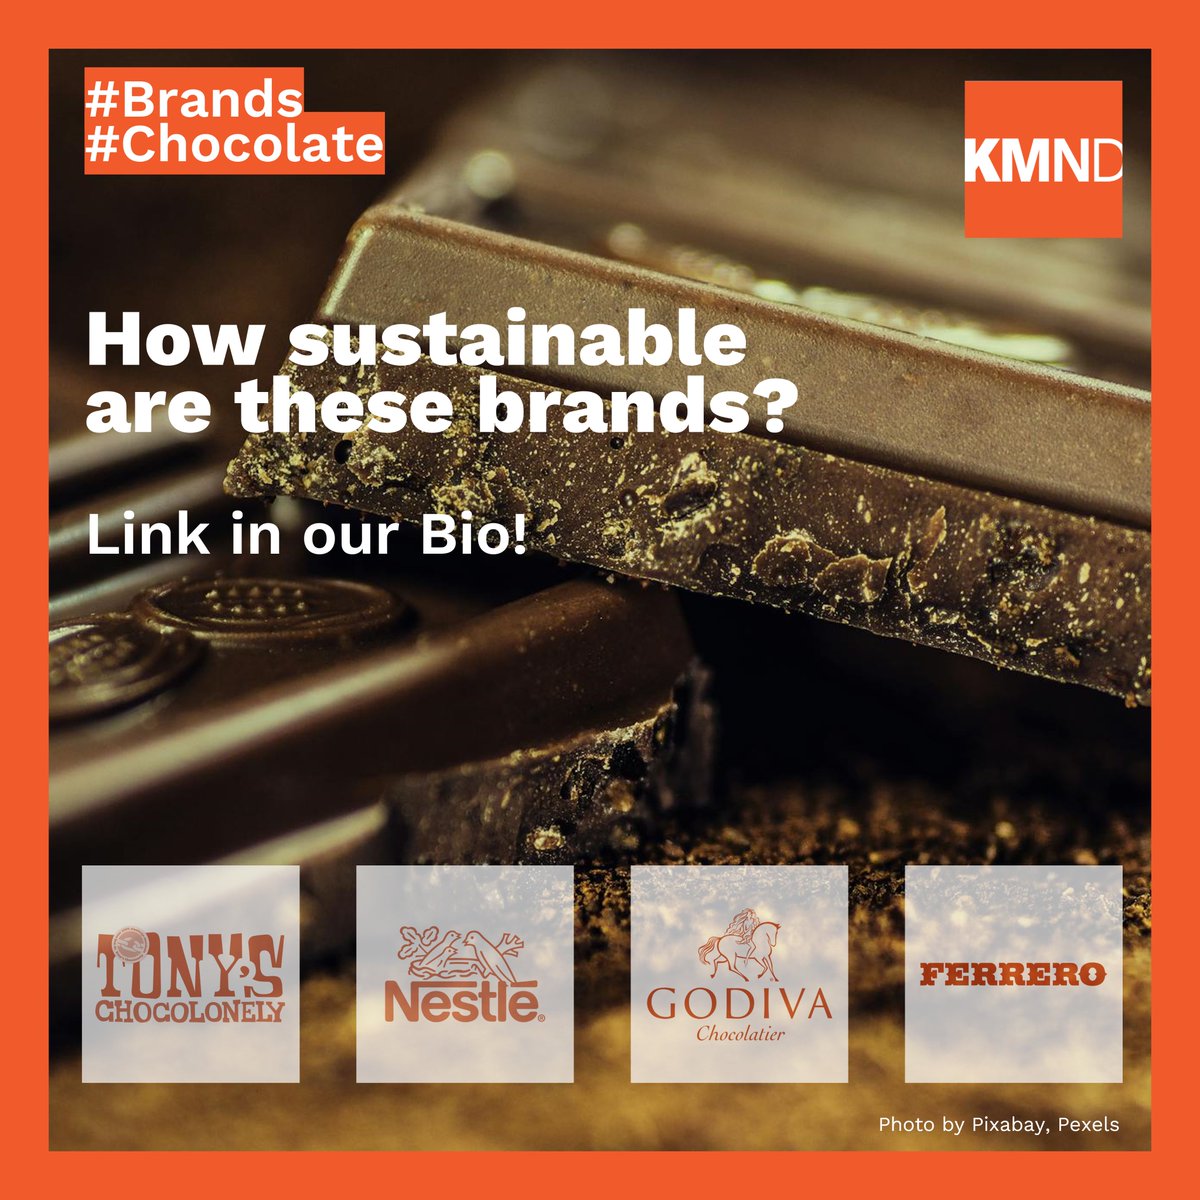 How sustainable are these brands? This month: @TonysChocoUK_IE, @Nestle, @Godiva and @FerreroUK

See them at komoneed.com/brands/

#chocolate #sneakers #homeappliances #mobilephones #lifestyle #lifestylenews #environnement #SustainableLiving